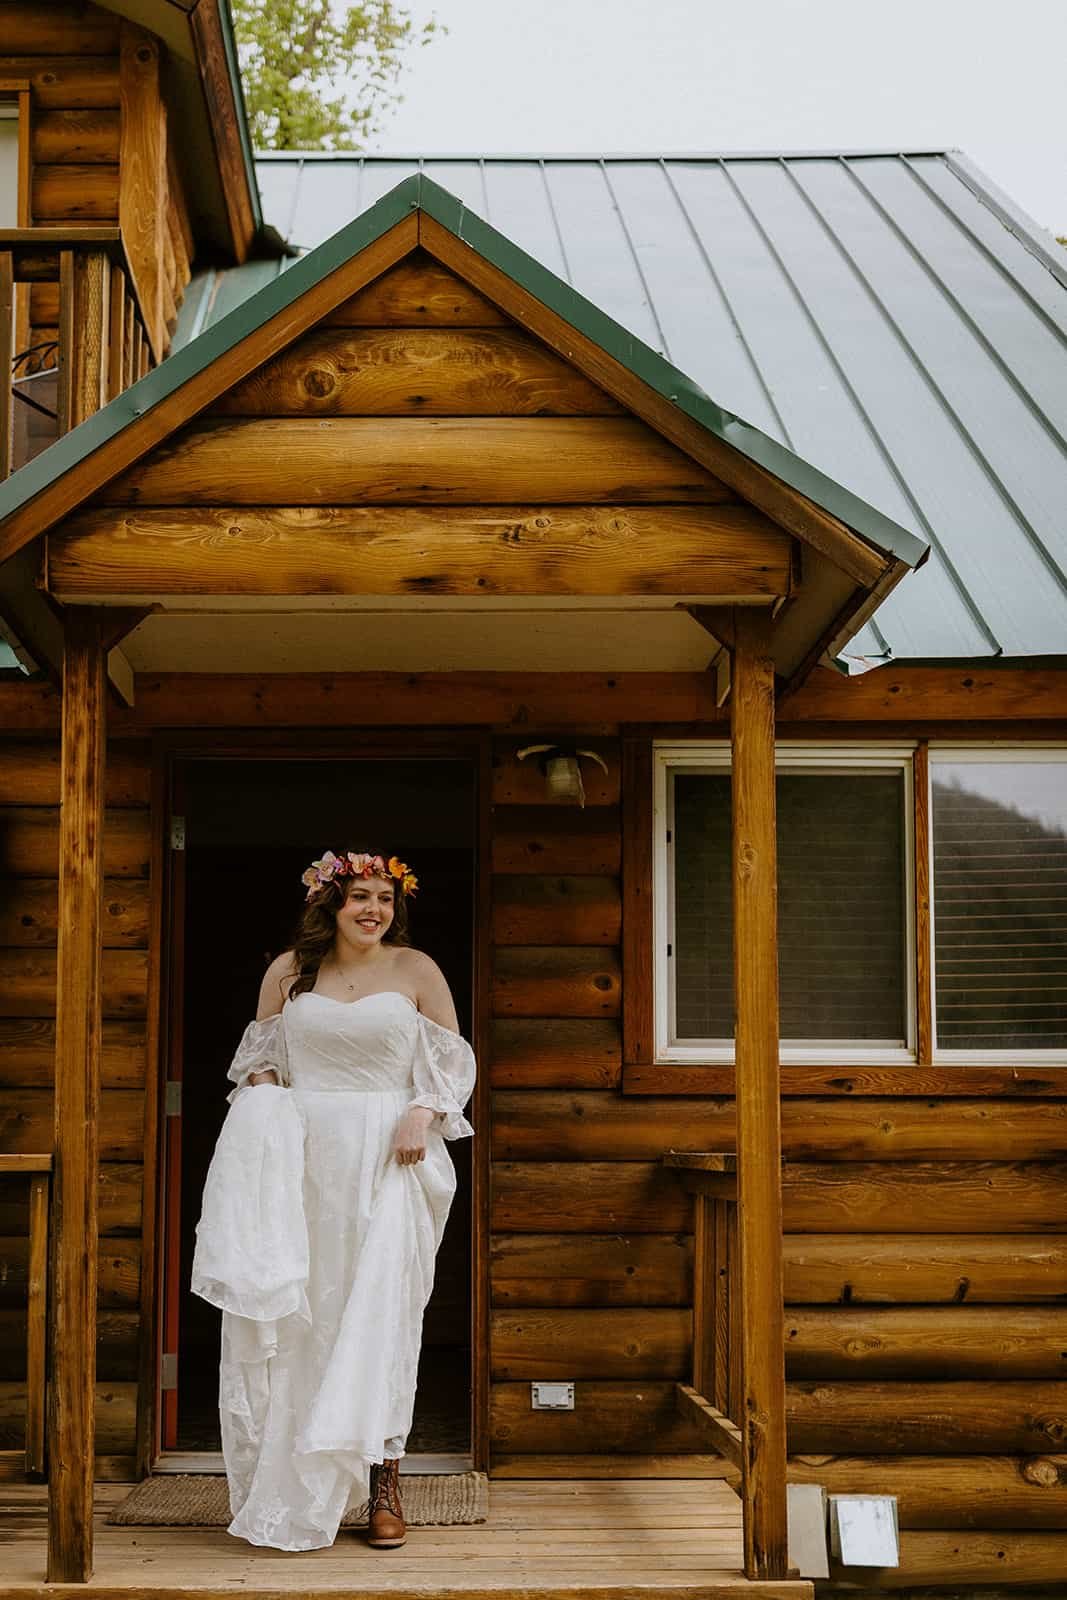 A woman holds her wedding dress up as she walks outside of the front door of a cabin